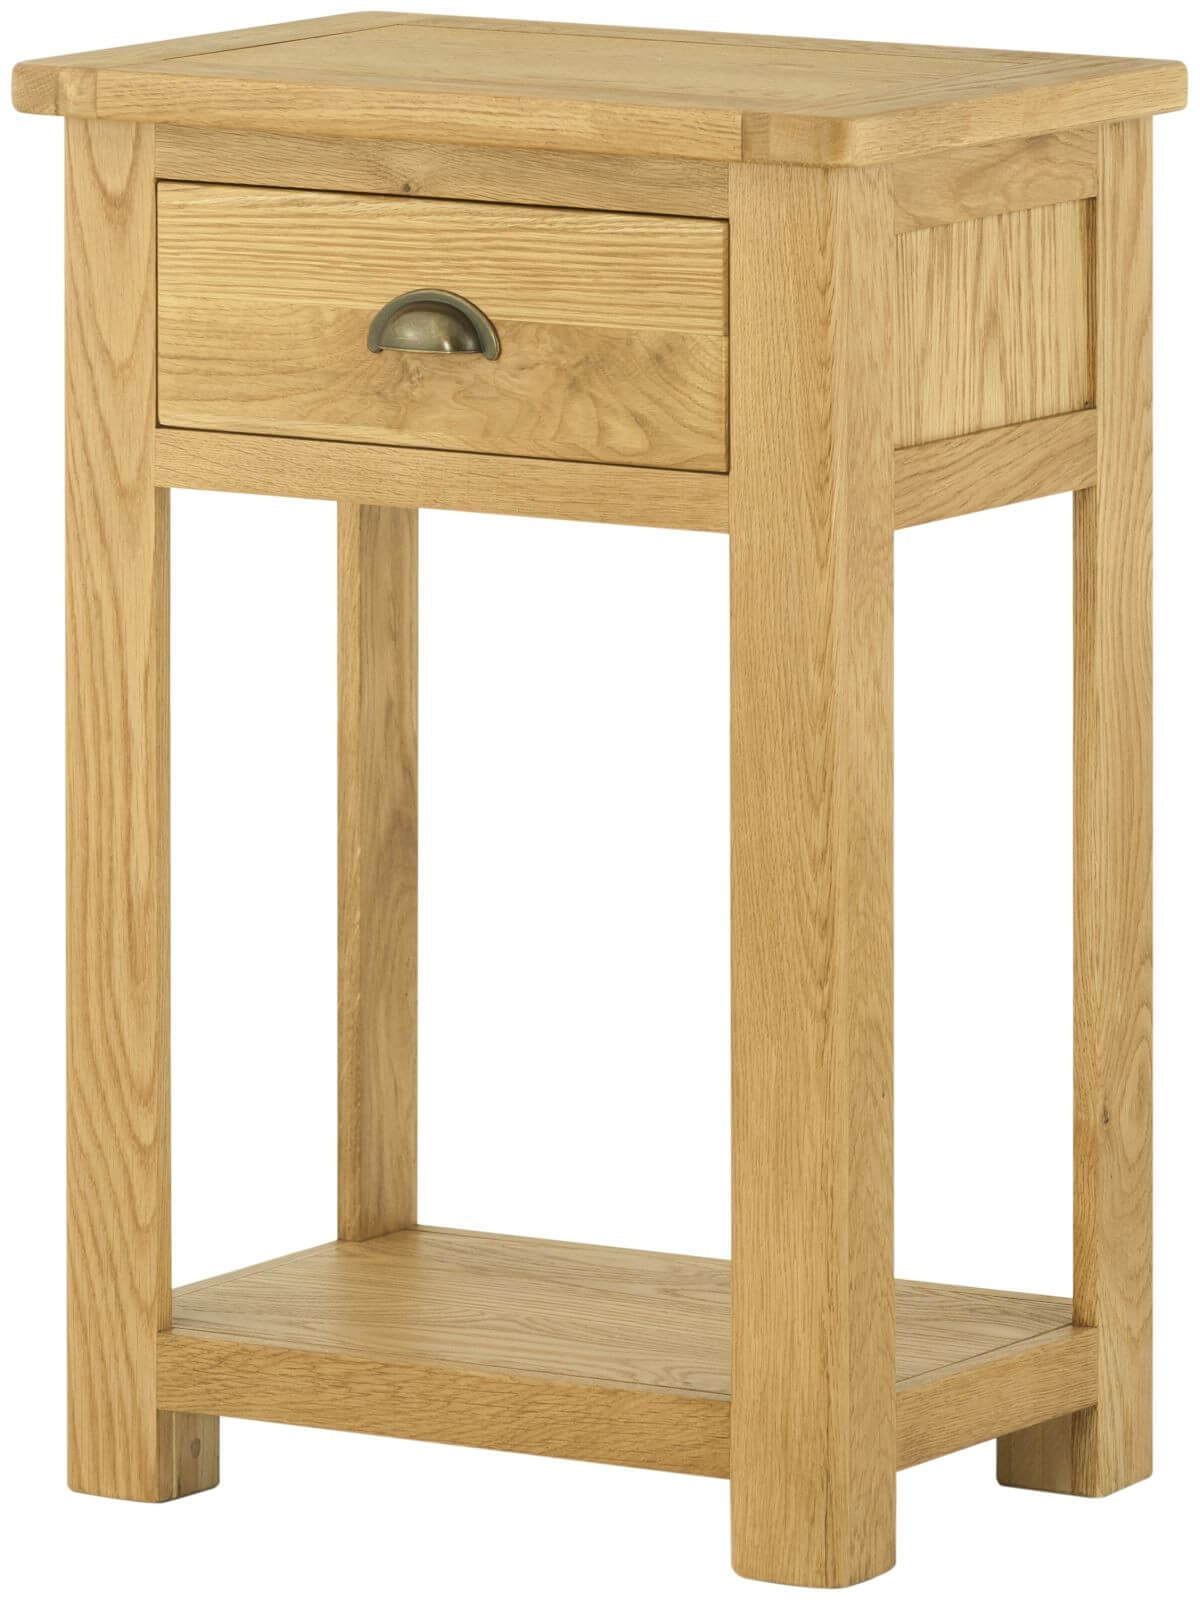 Showing image for Small seattle console table - oak